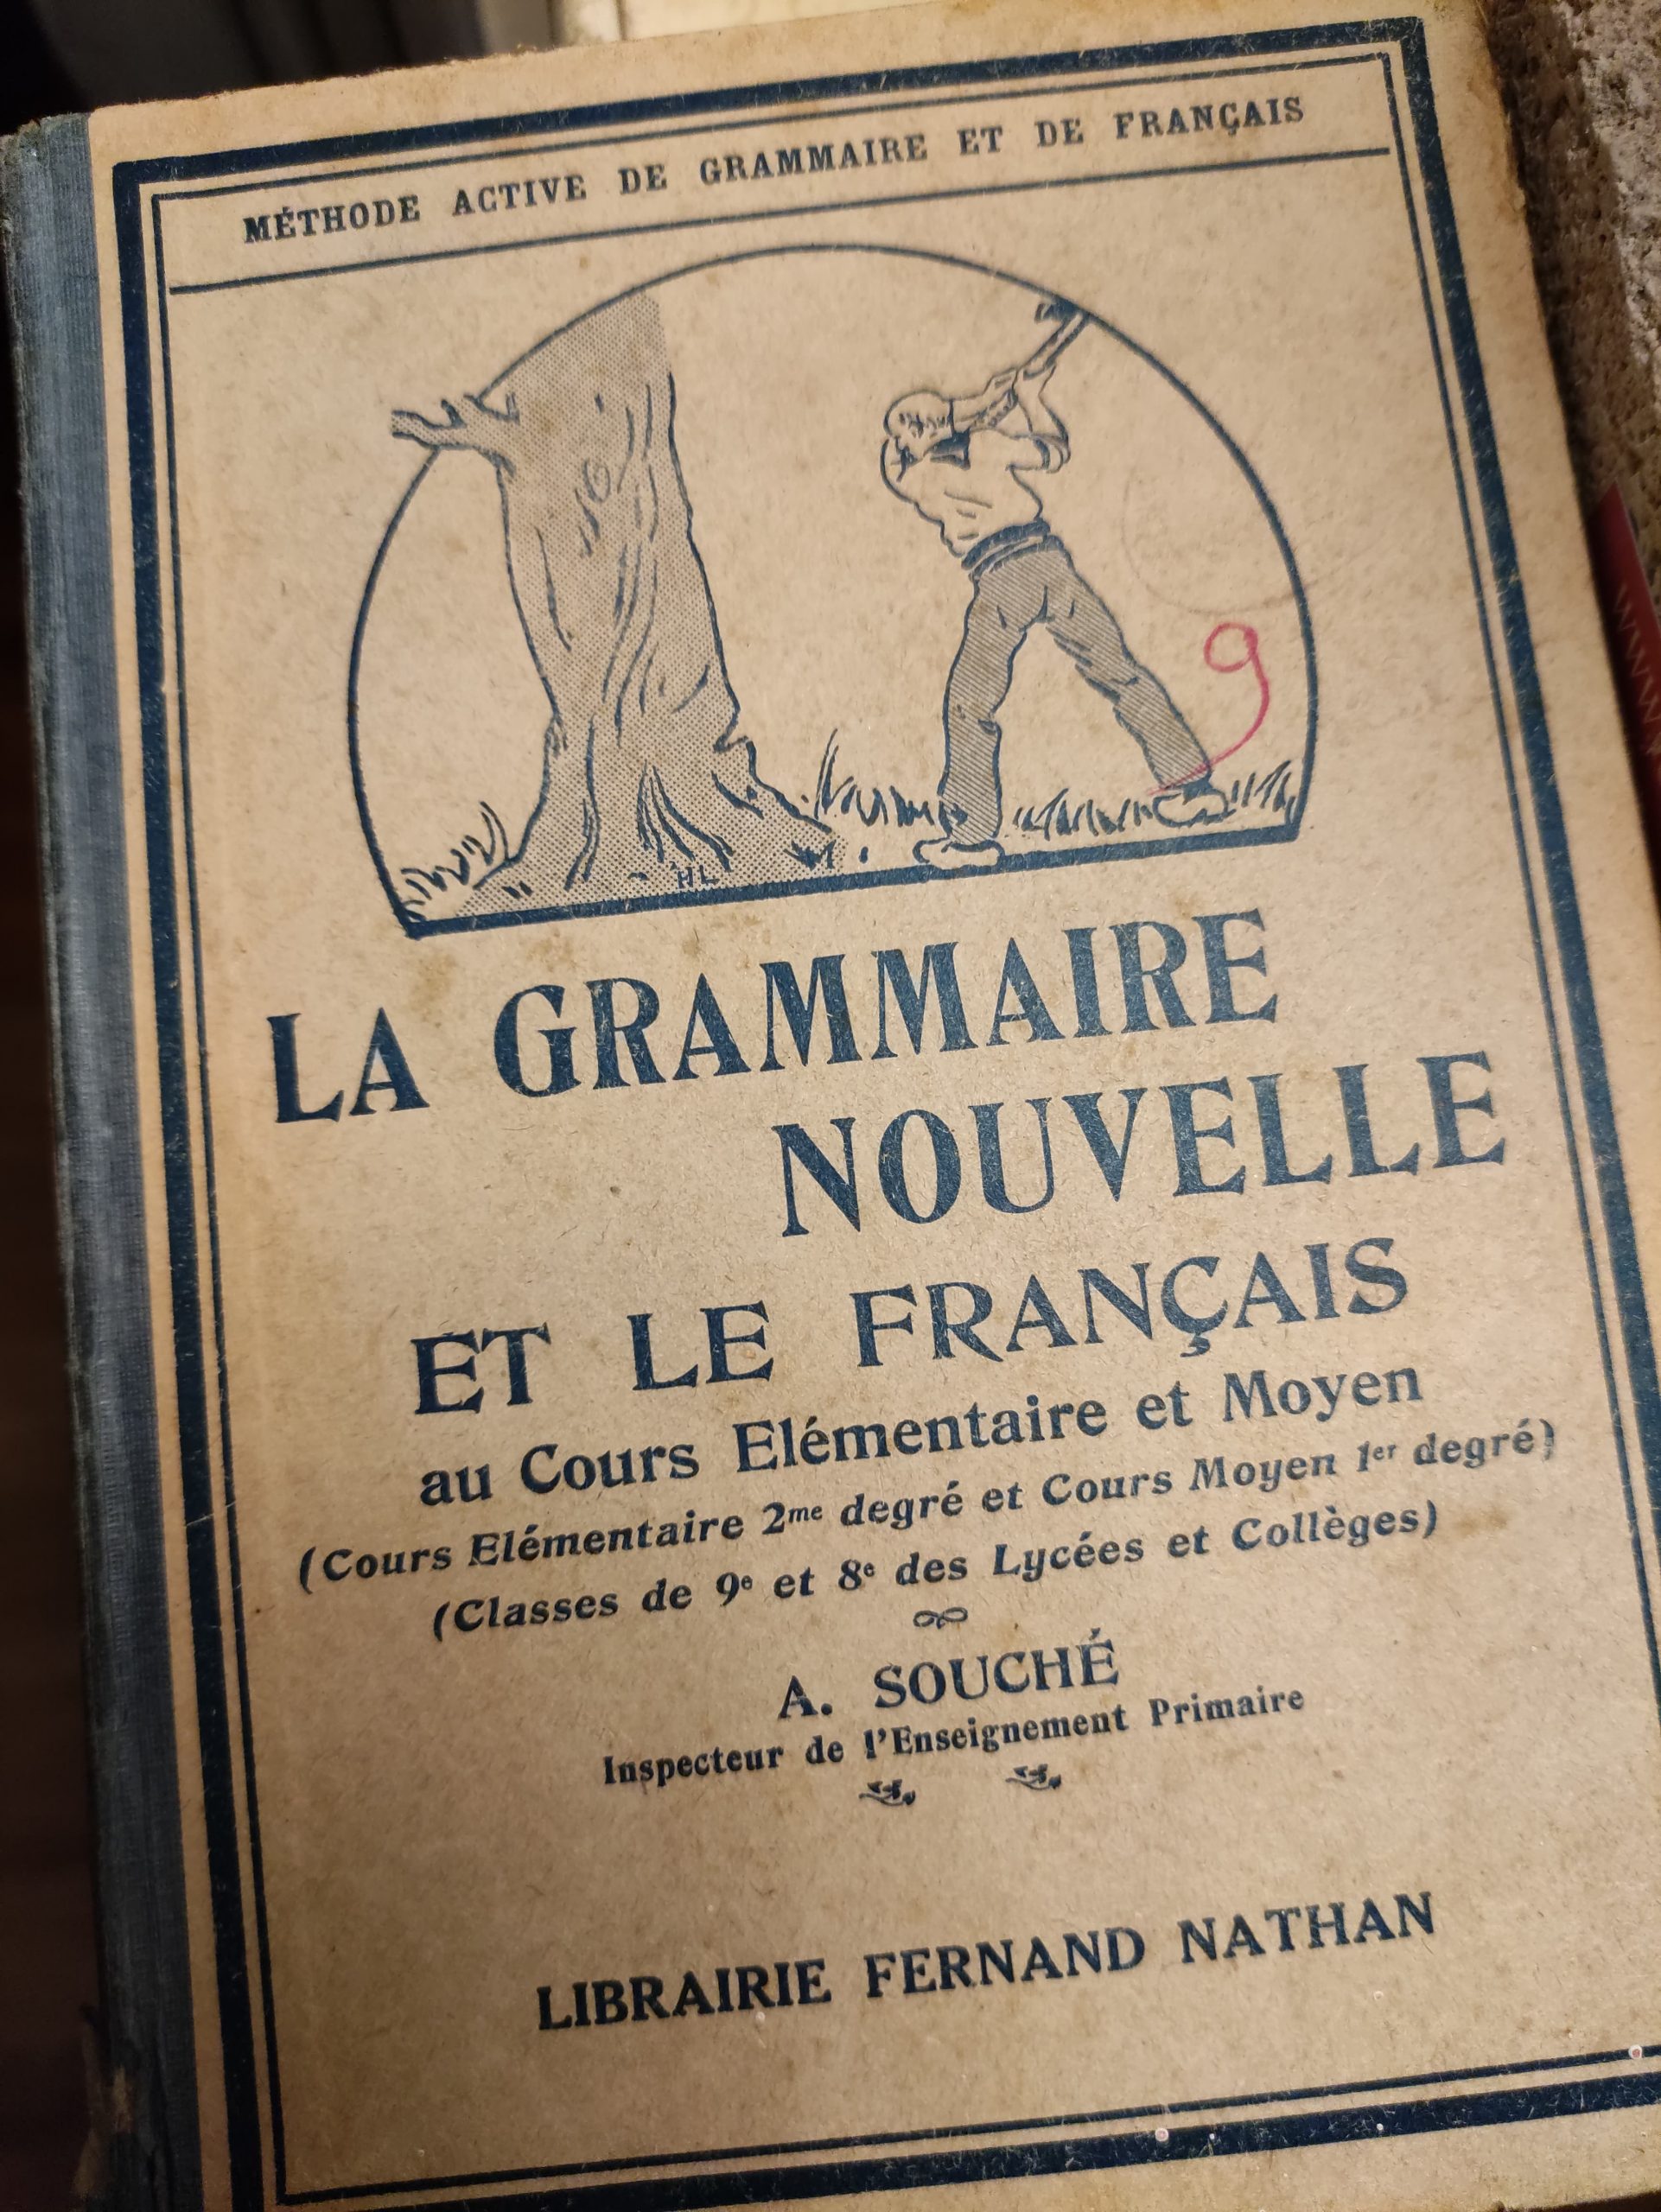 Naufrage orthographique et grammatical